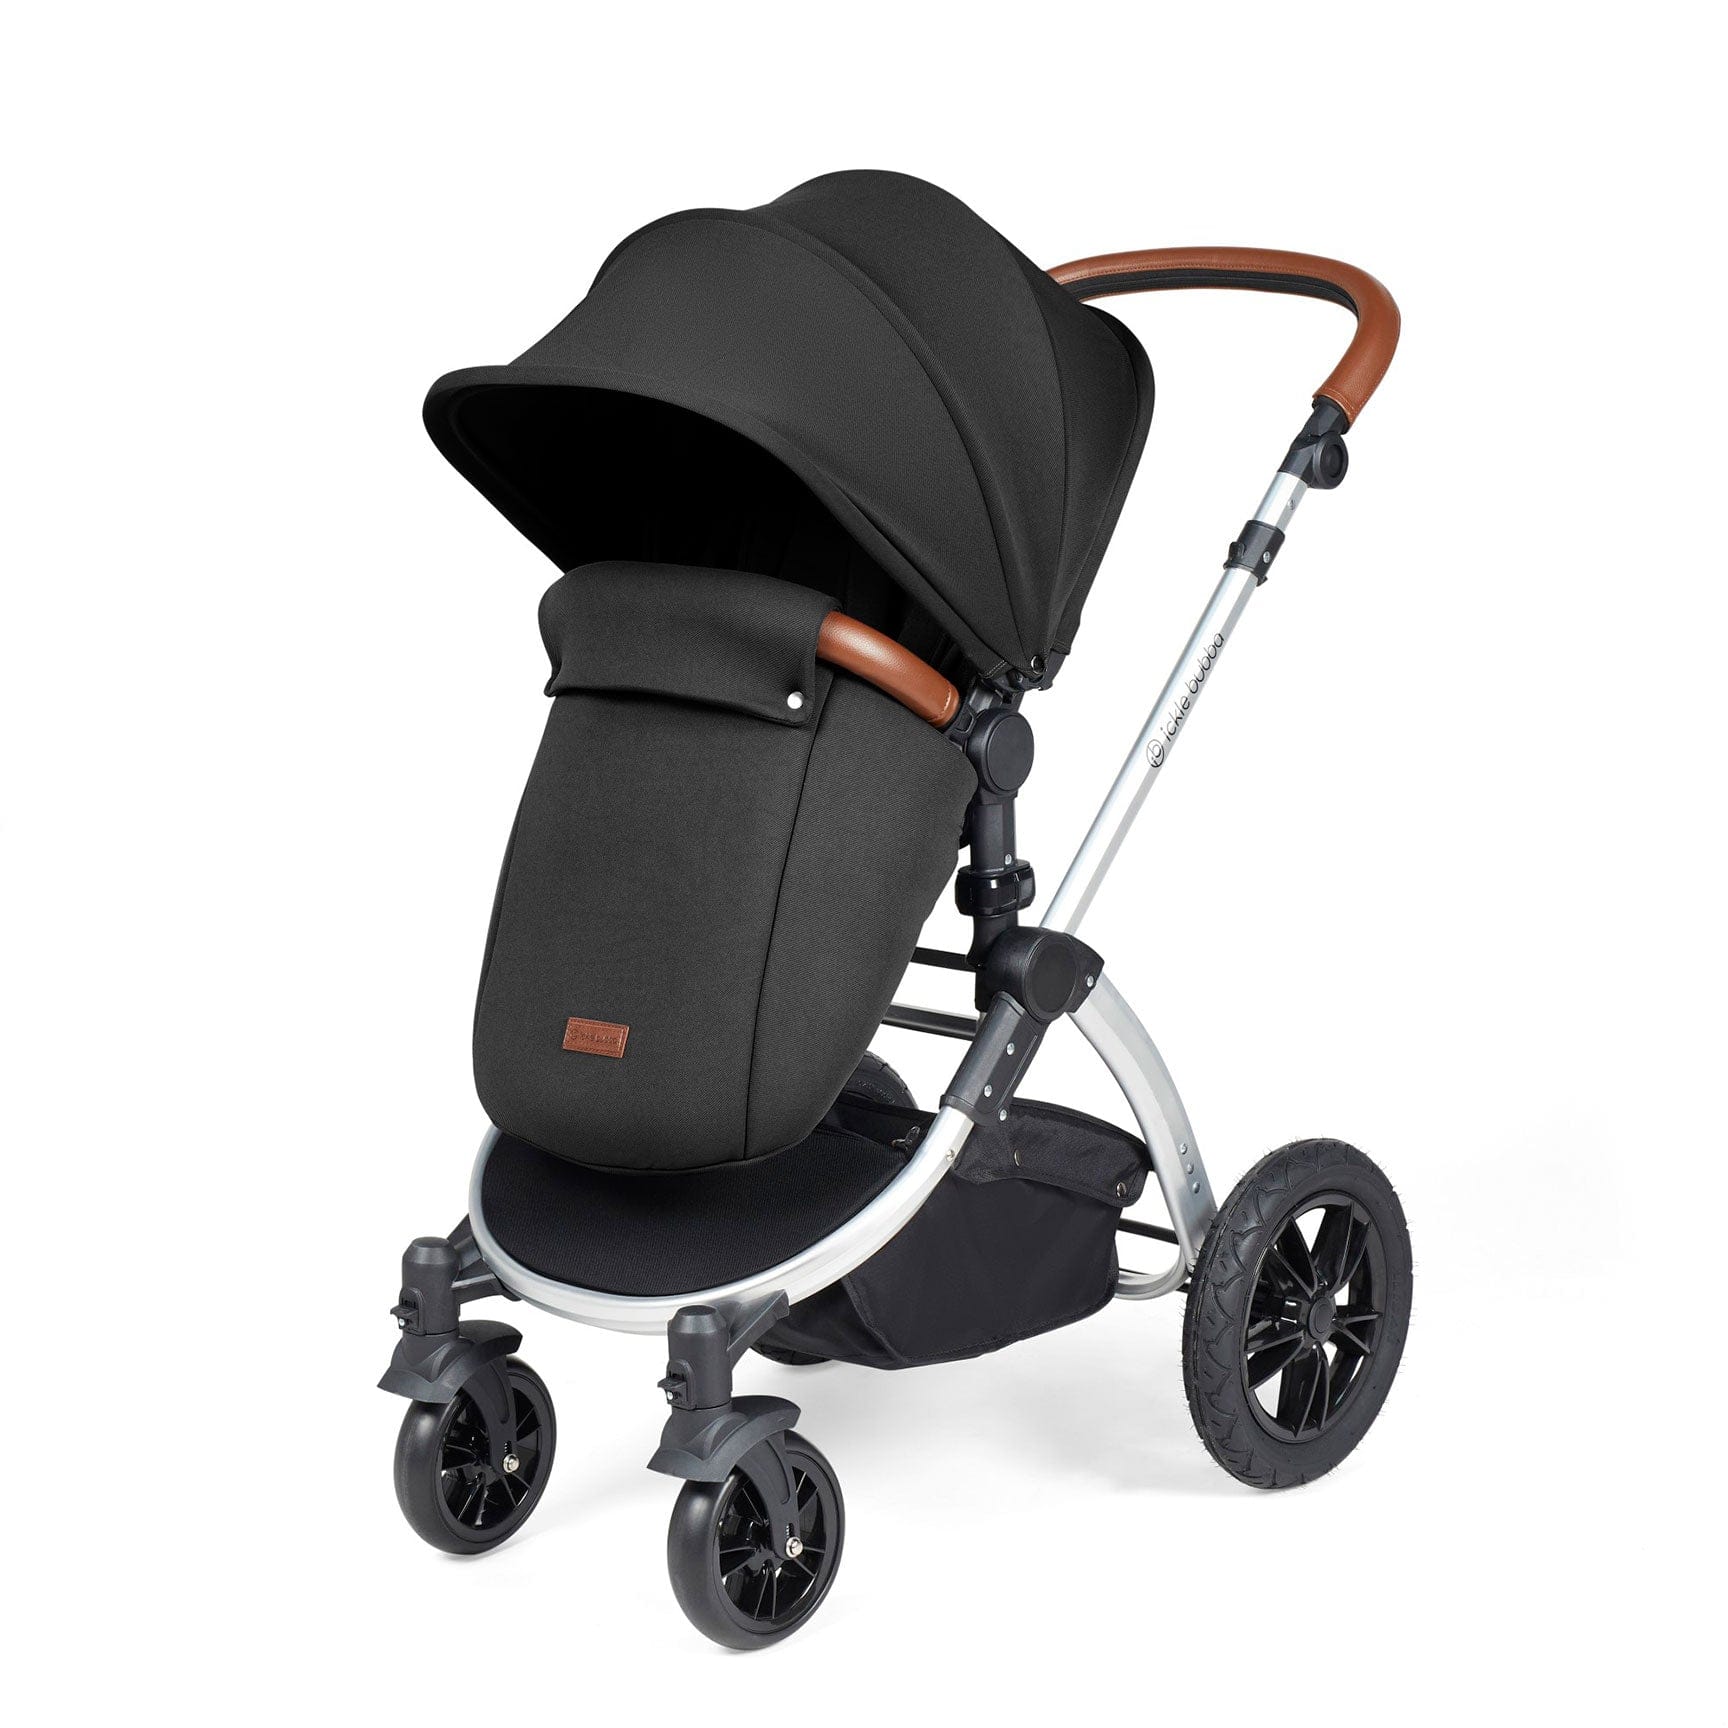 Ickle Bubba Stomp Luxe All-in-One Travel System with Isofix Base in Silver/Midnight/Tan Travel Systems 10-011-300-250 5056515026528